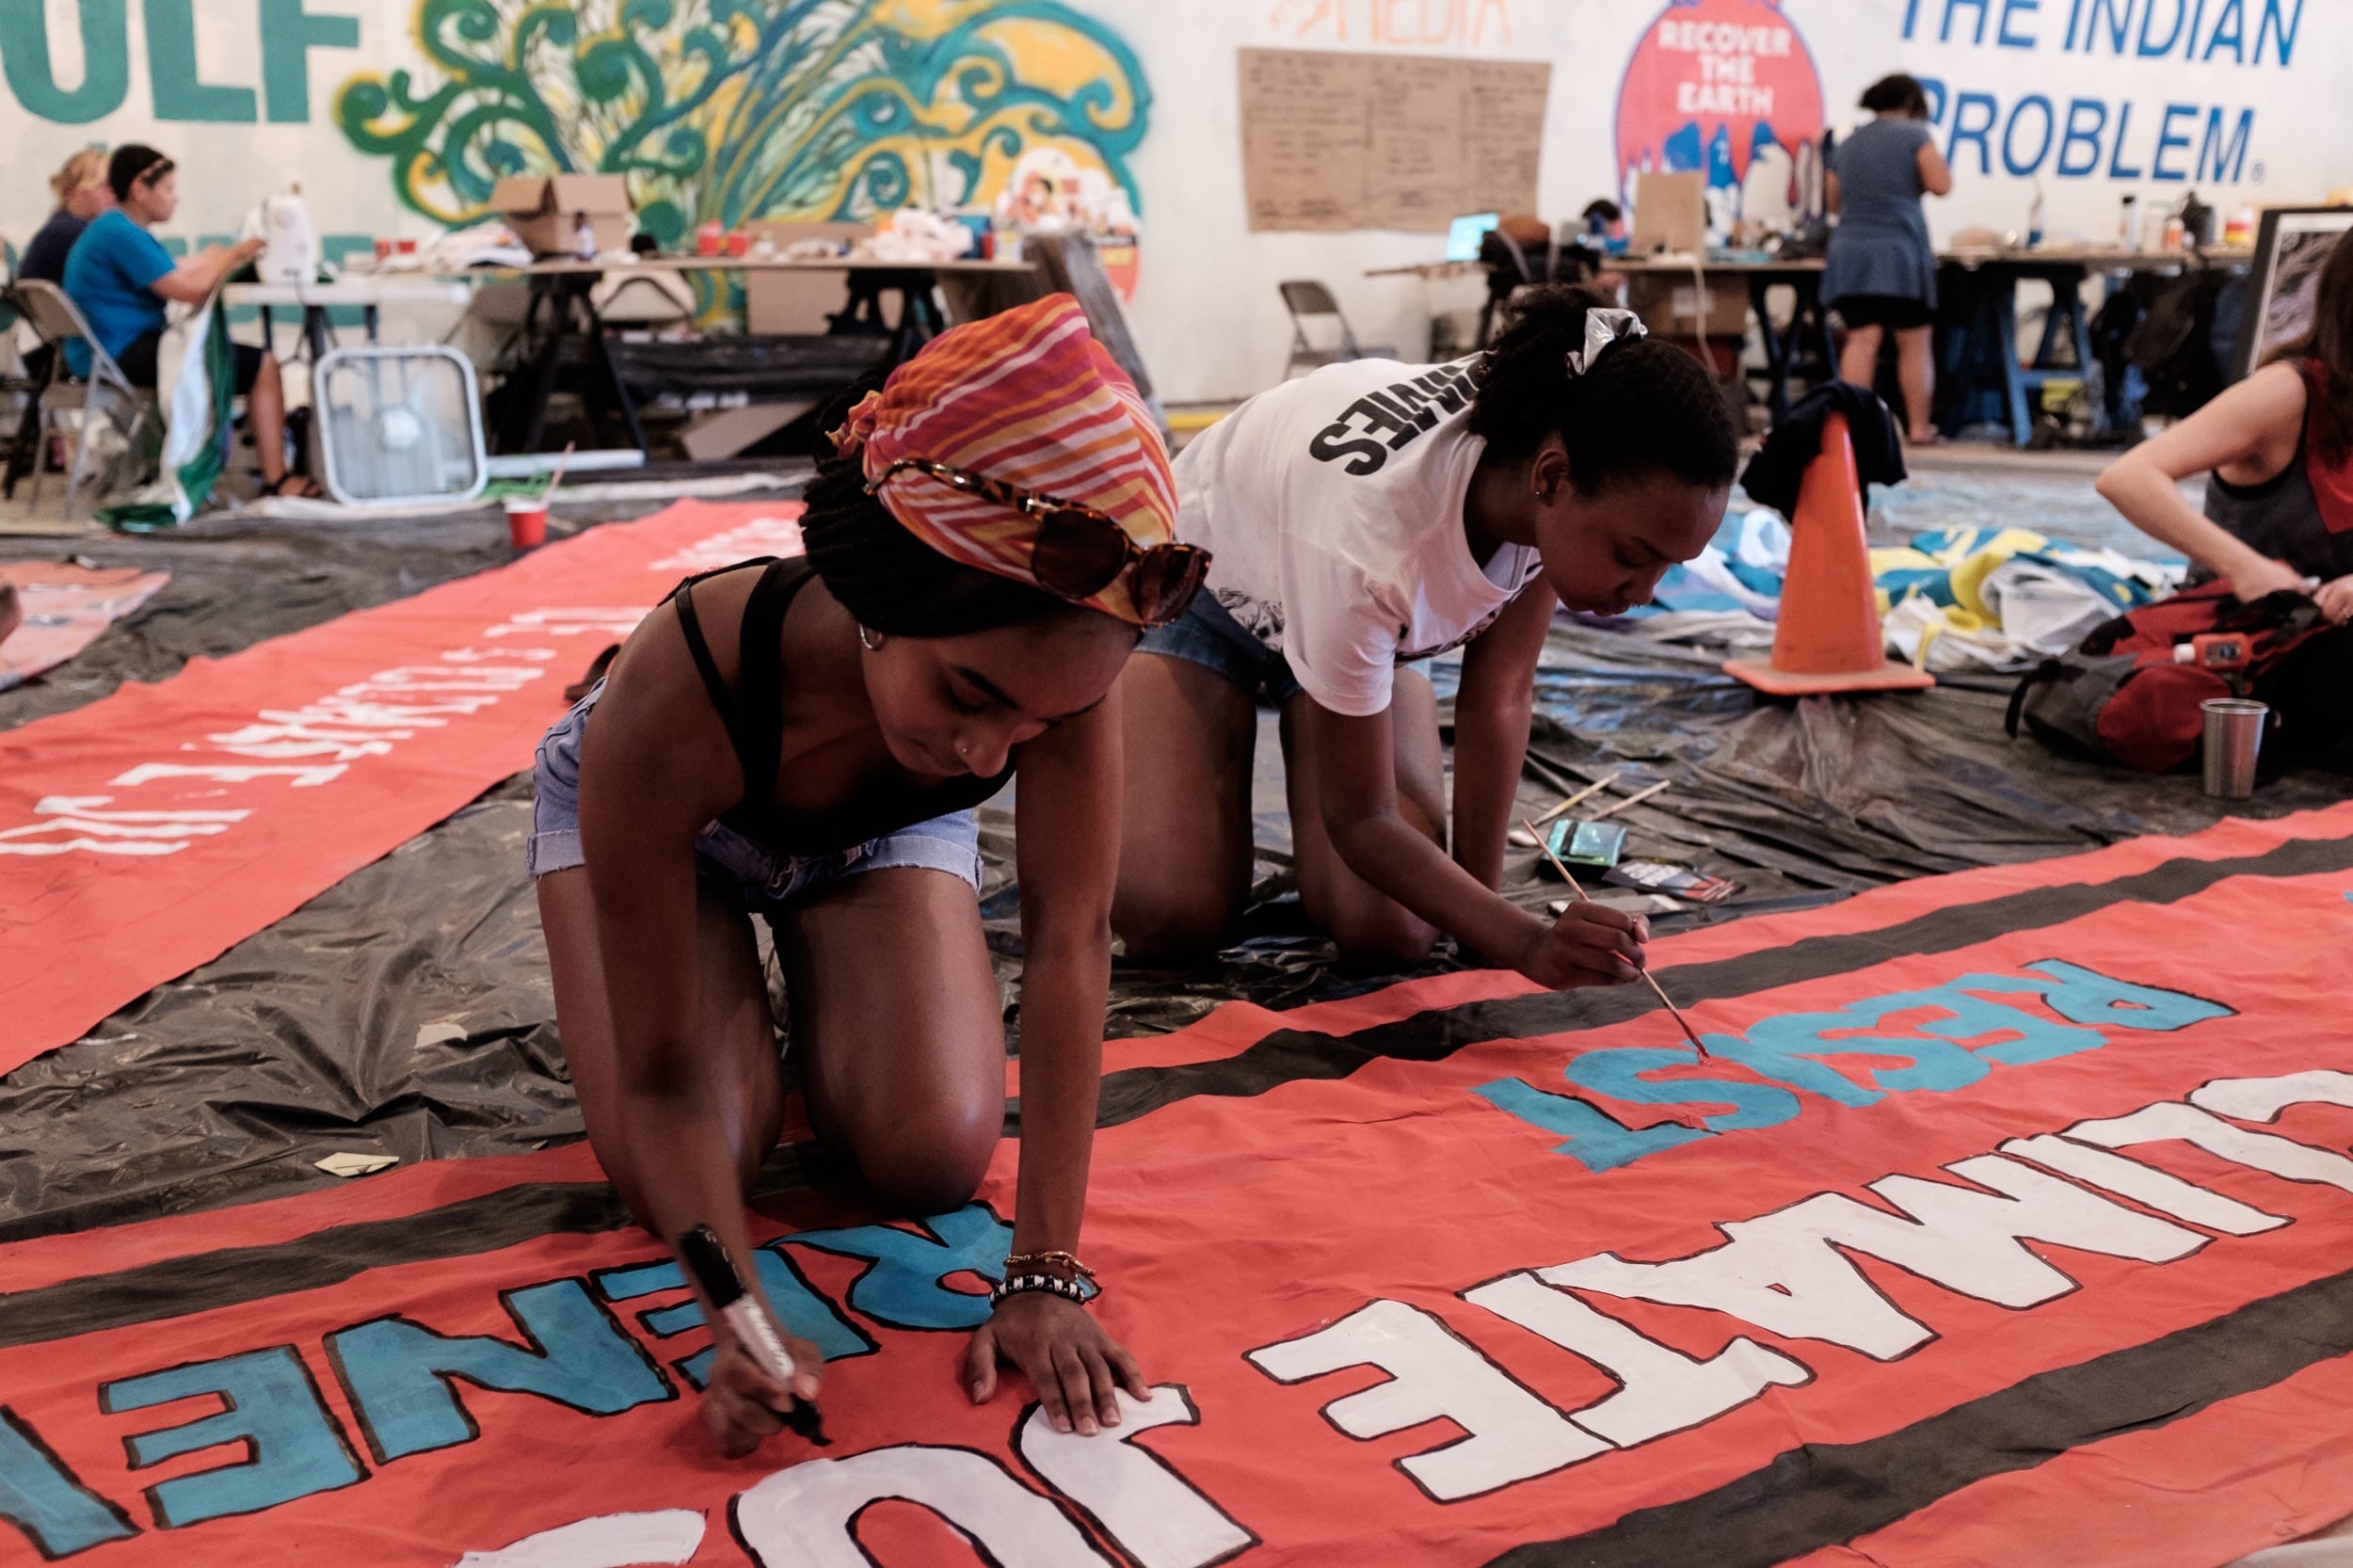 Two women creating a red banner with the text 